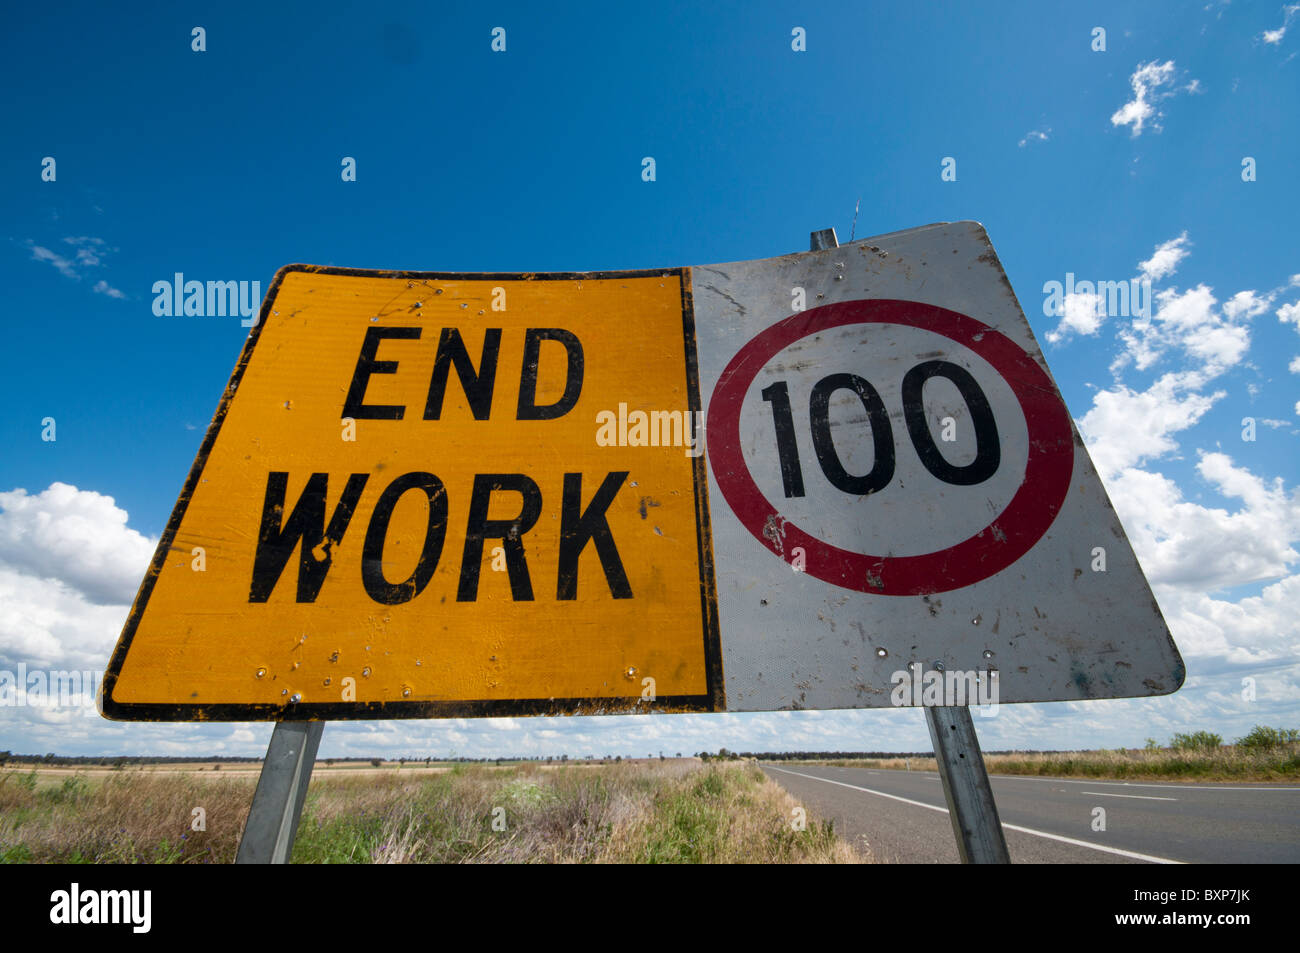 Signs indicating end of road work and speed limit of 100 kph Stock Photo